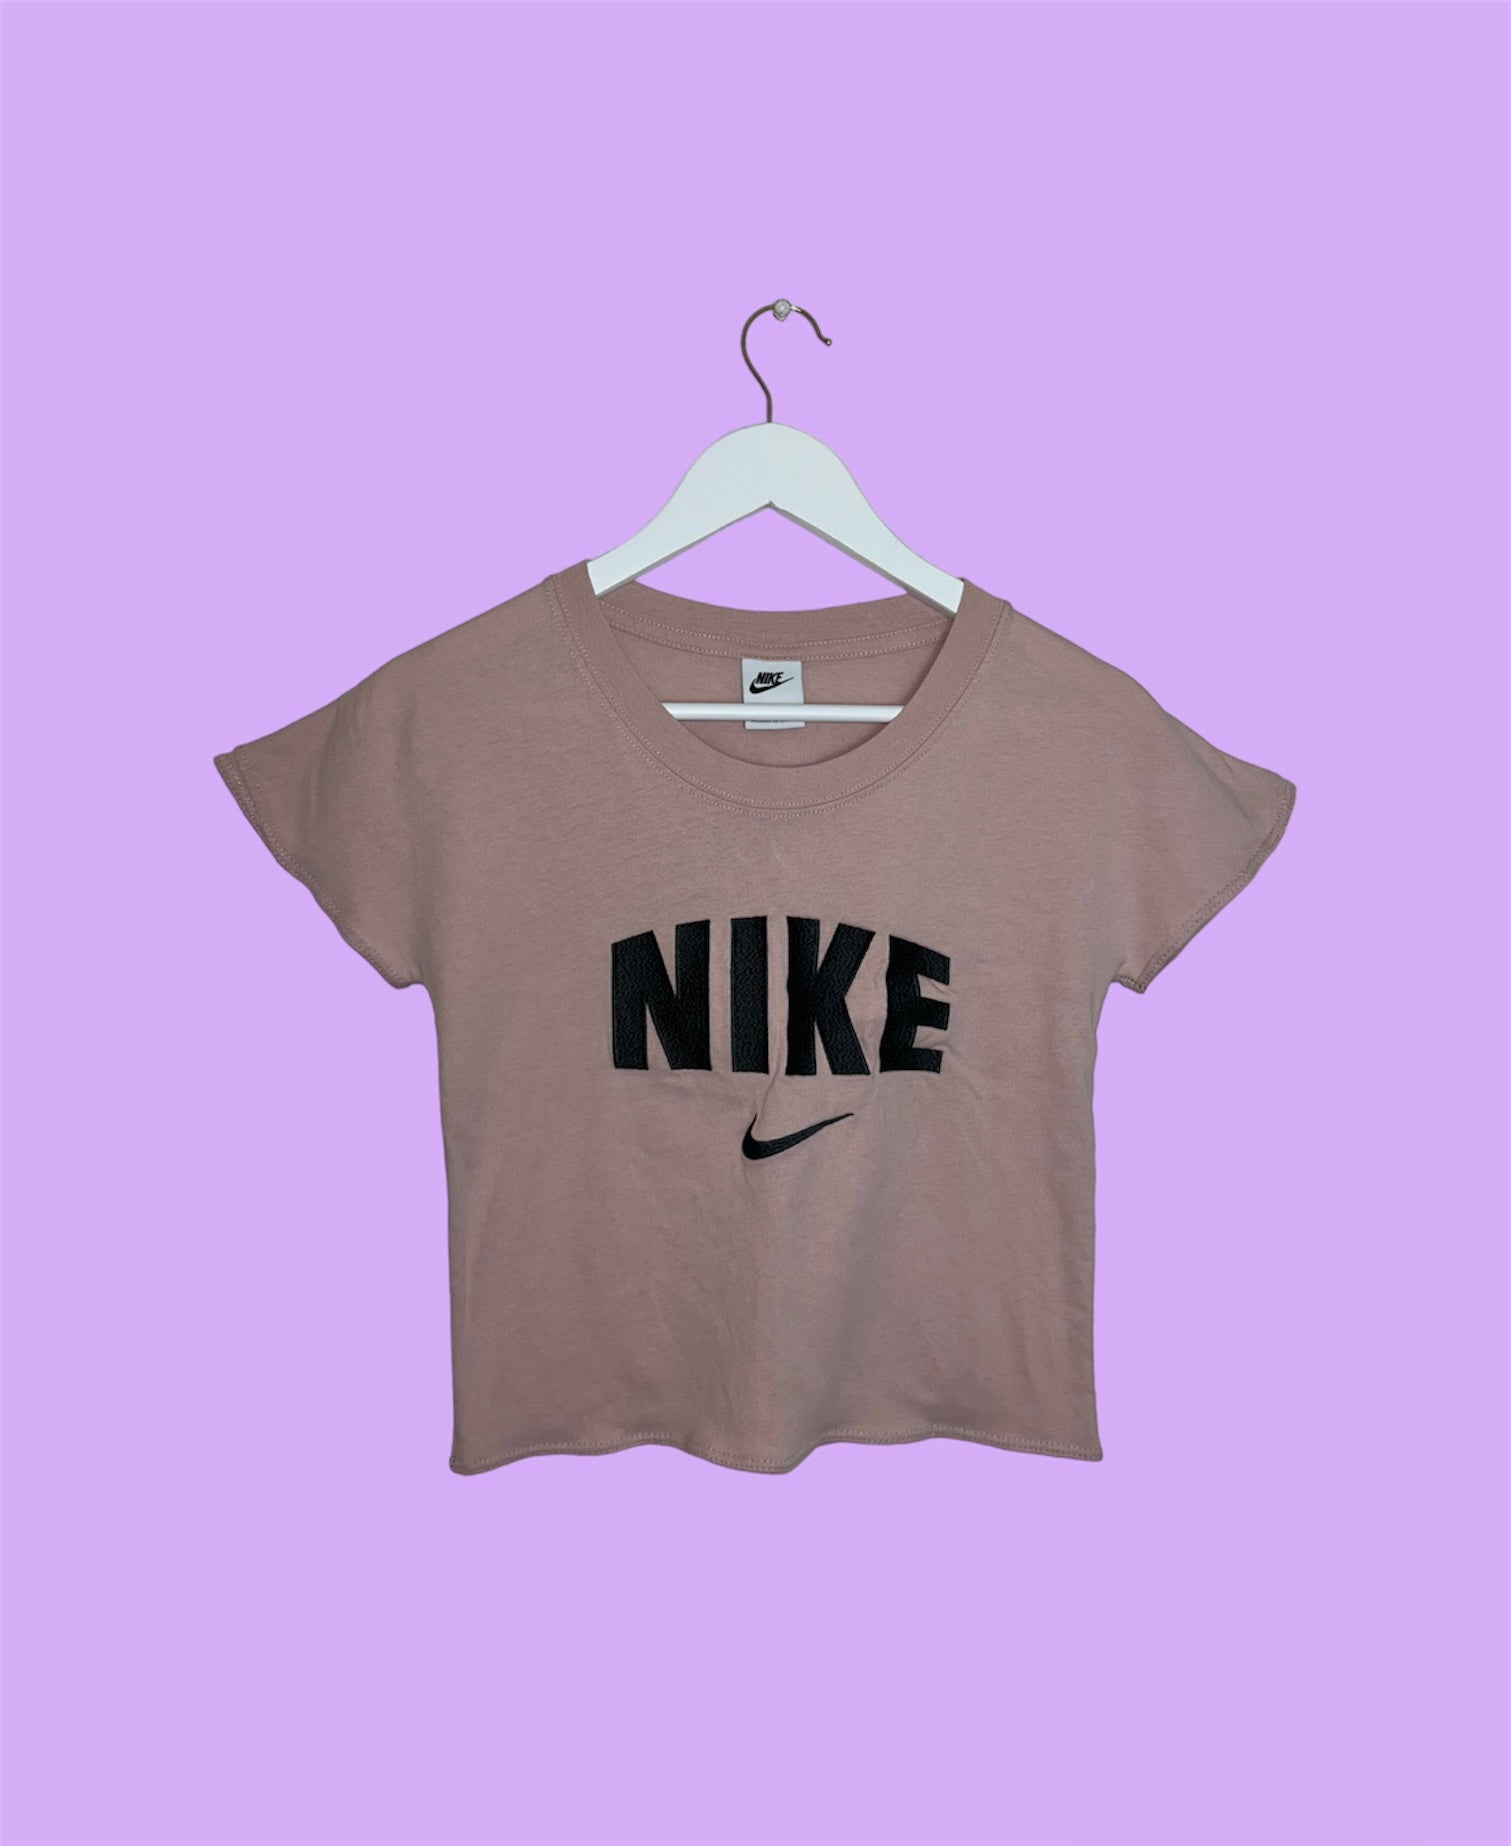 light pink short sleeve crop top with black nike logo shown on a lilac background